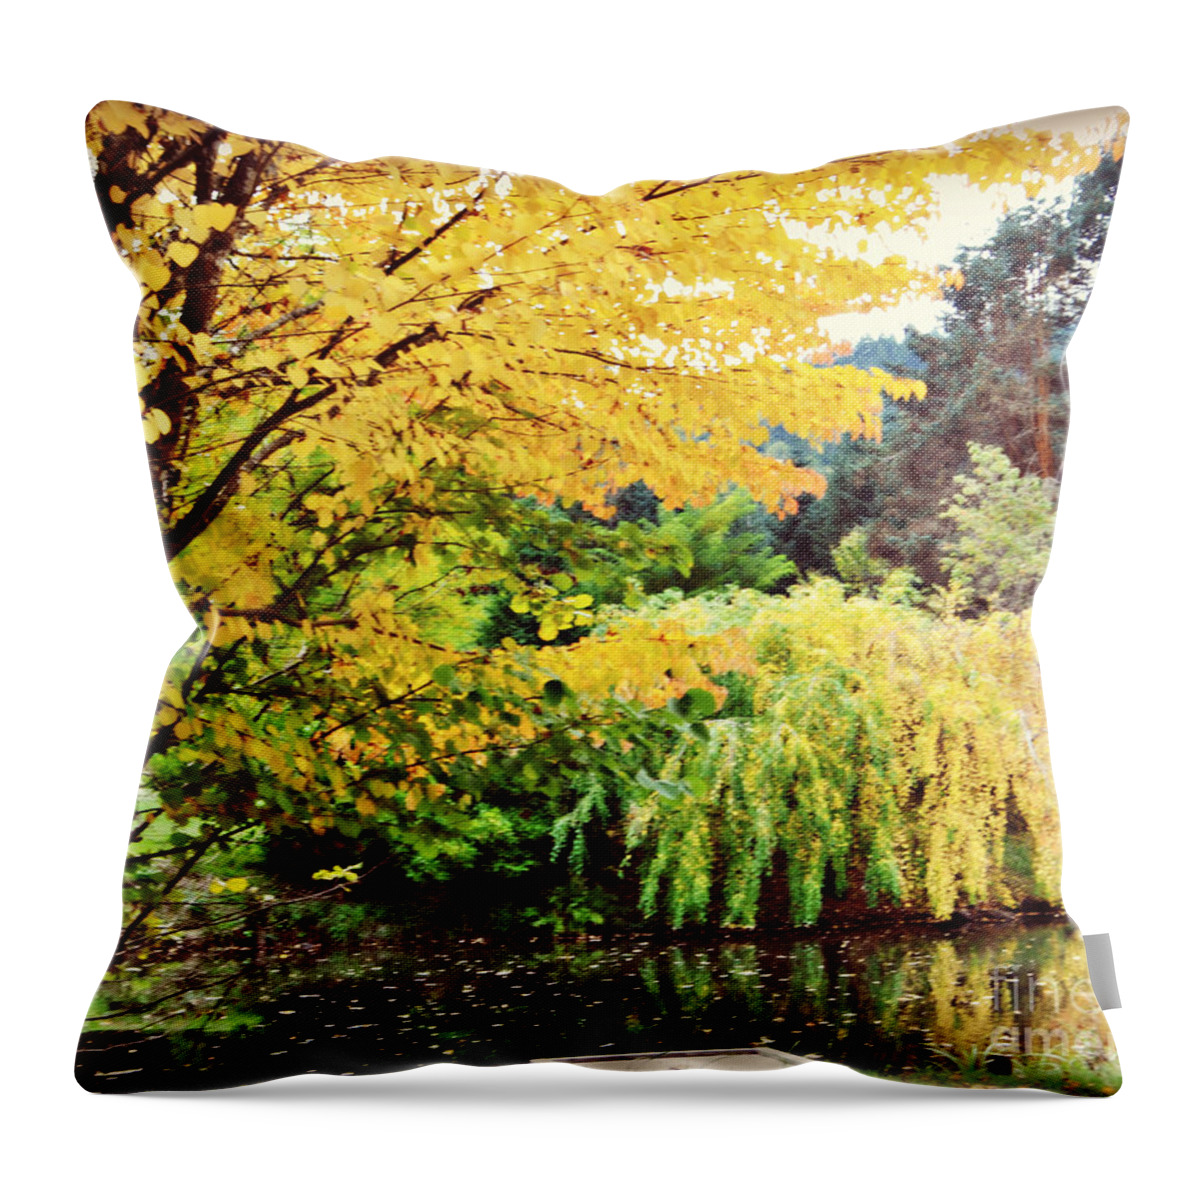 Pond Throw Pillow featuring the photograph The Wayfarer Pond by Mindy Bench